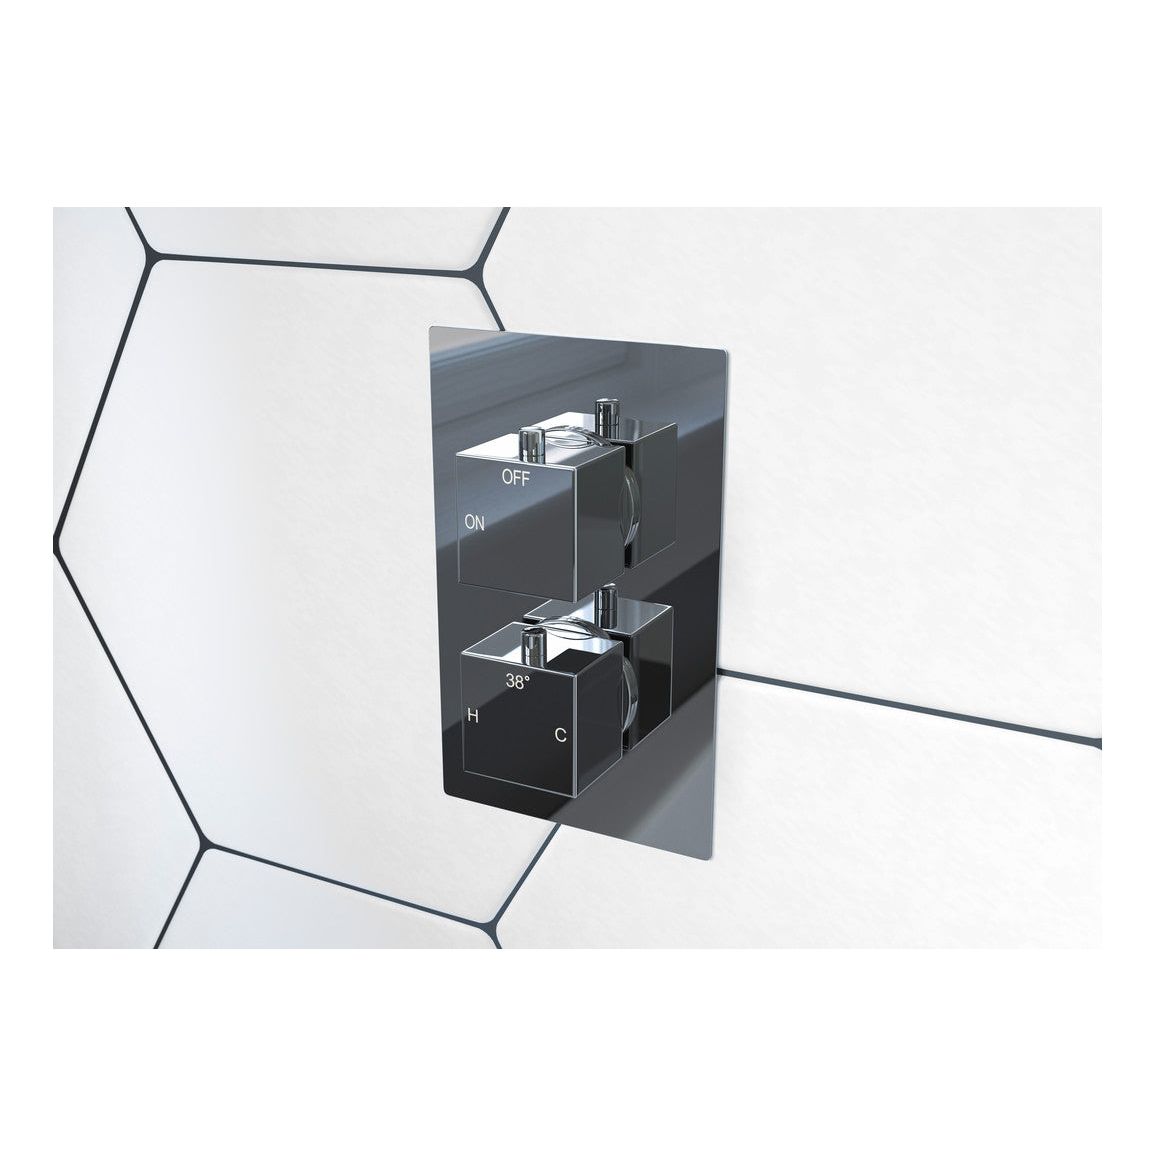 Eubank Thermostatic Single Outlet Twin Shower Valve